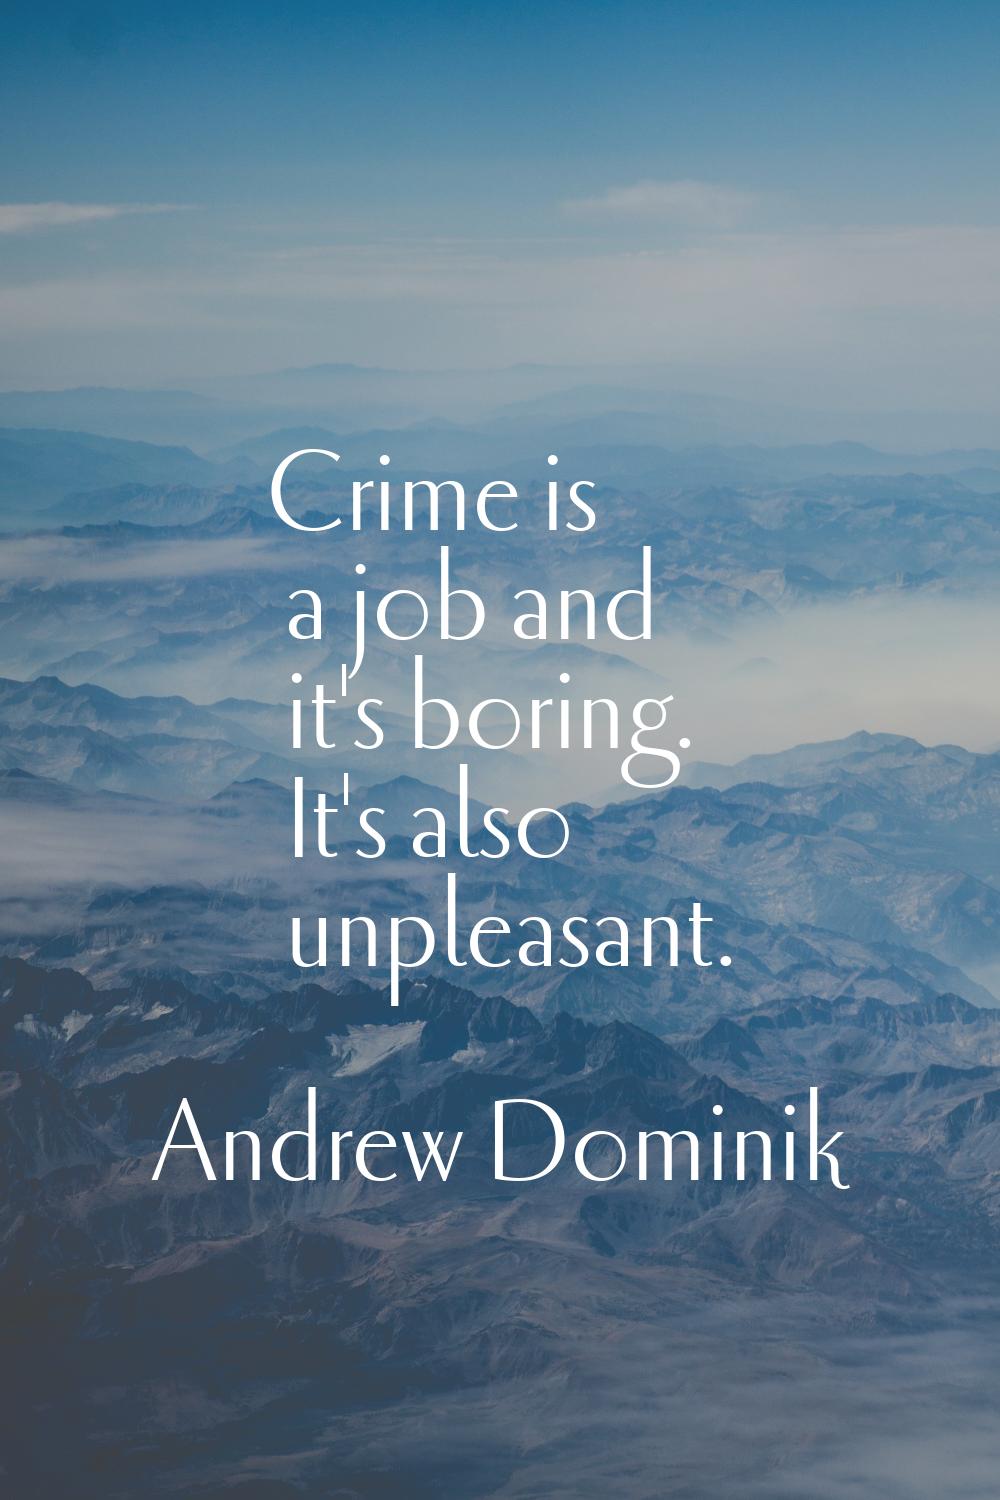 Crime is a job and it's boring. It's also unpleasant.